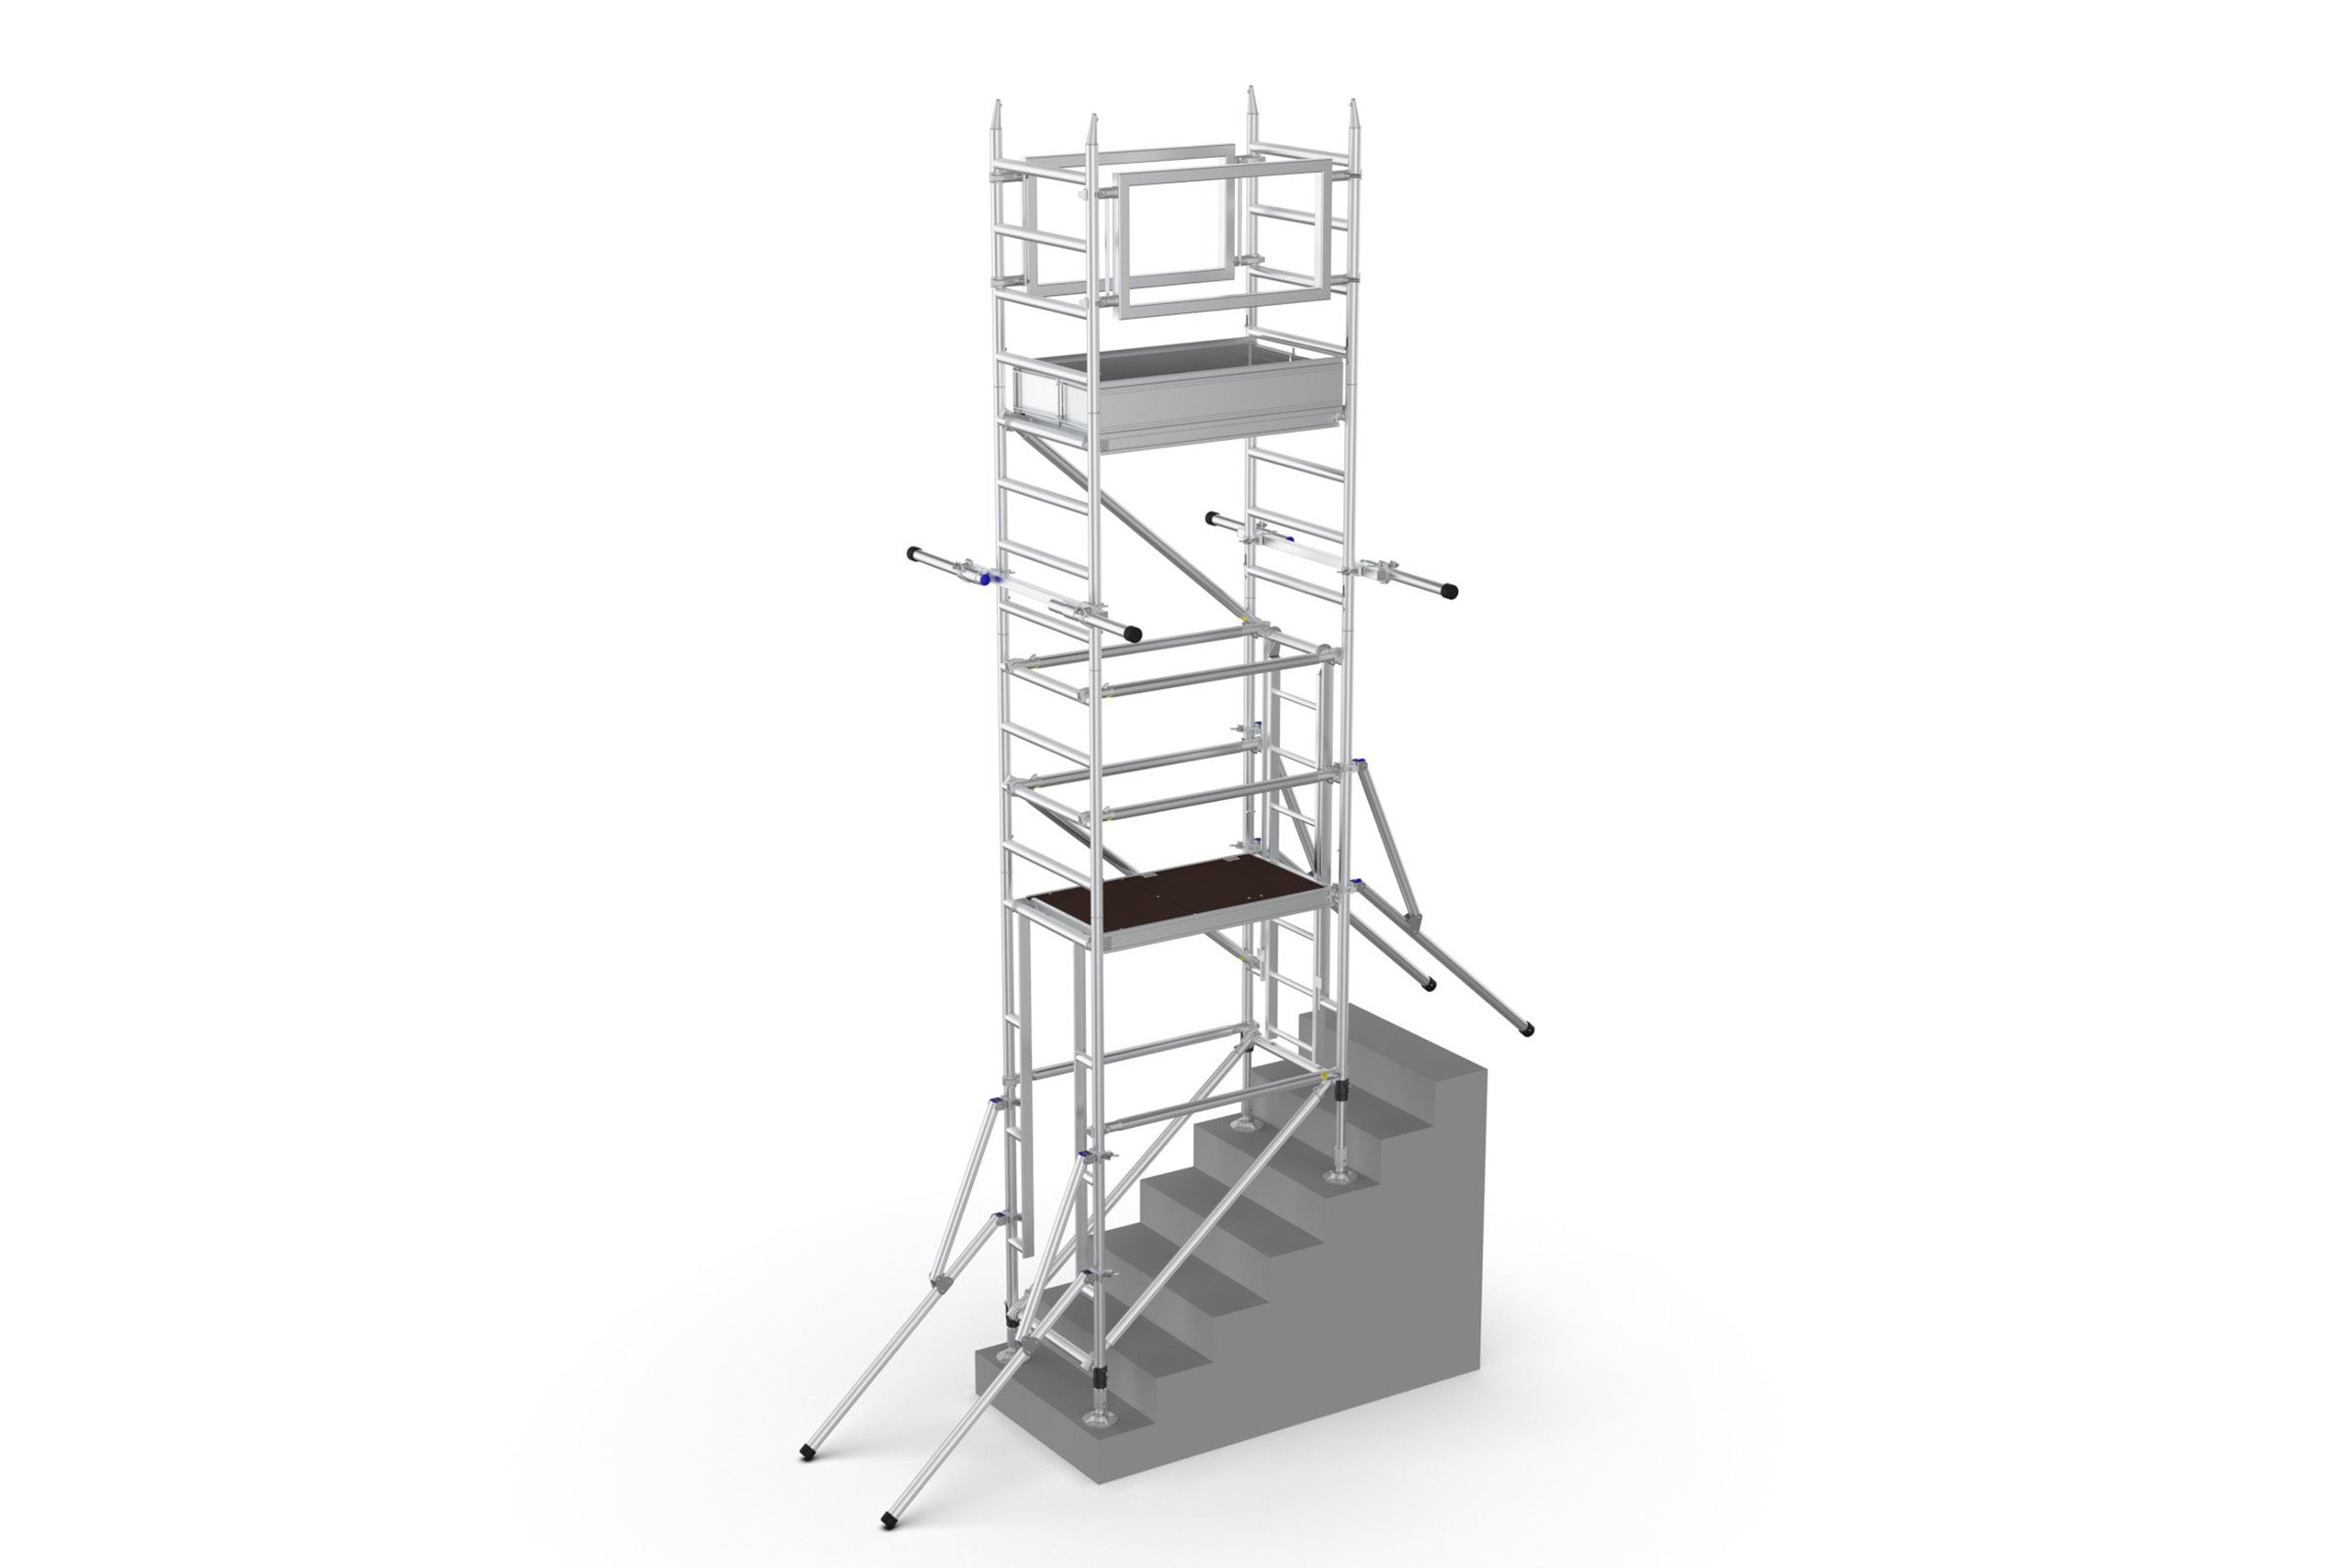 AN image showing a 4m Alto Stairwell Pro Tower.